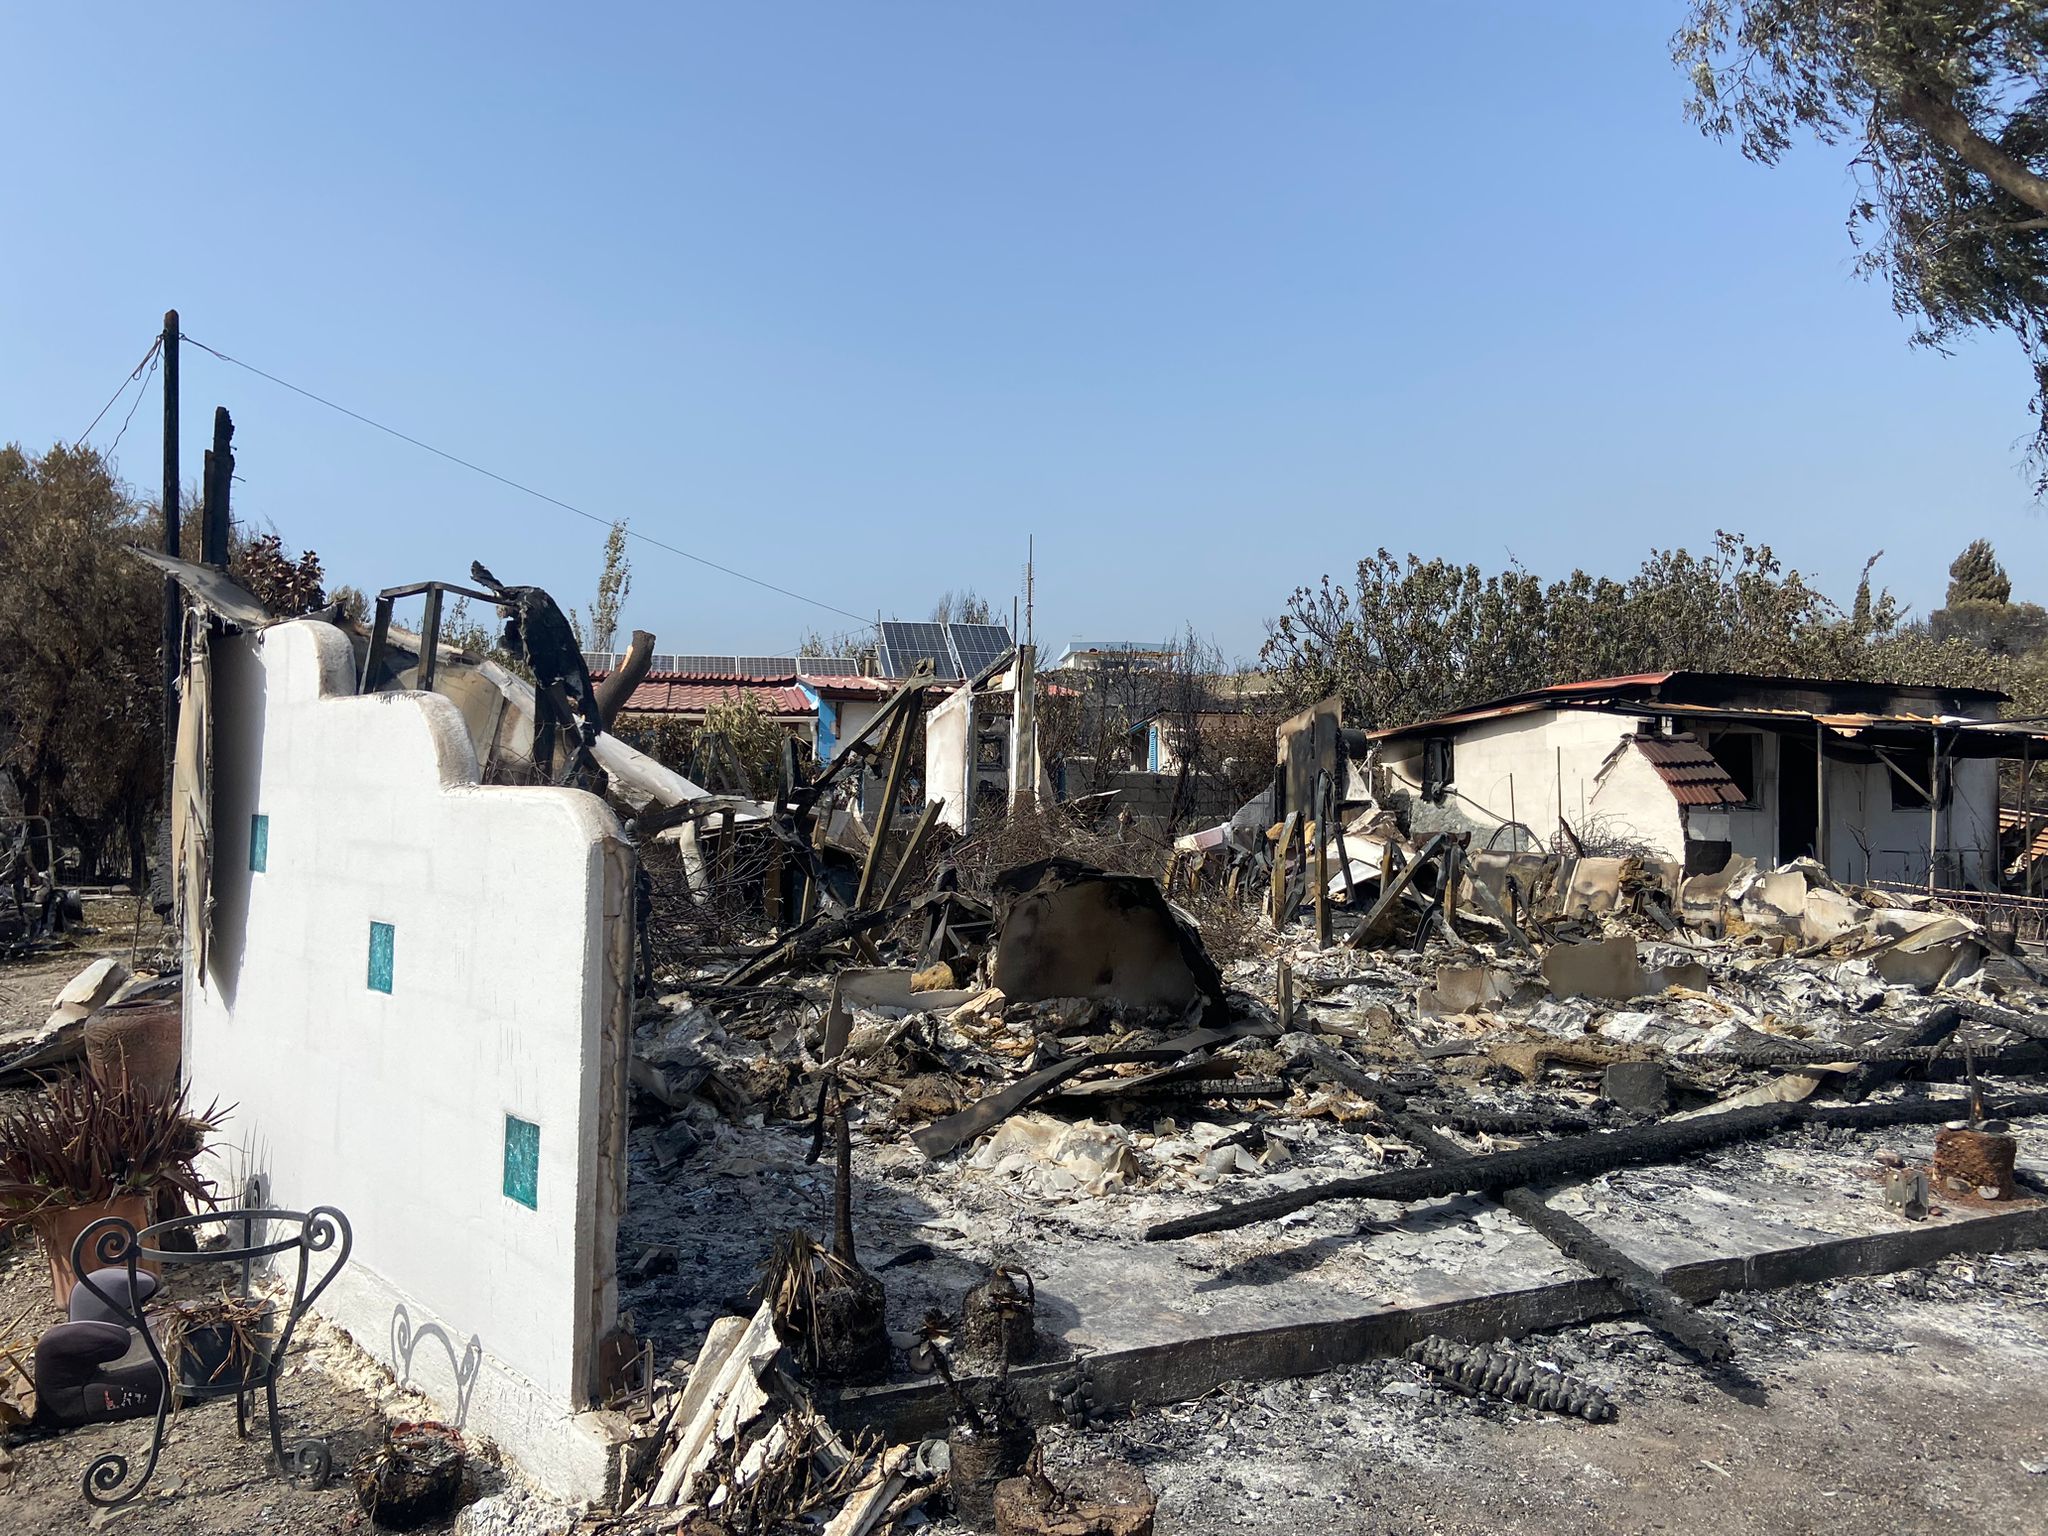 Summer shock: several houses in the Rhodes resort of Kiotari were reduced to rubble and ashes by the wildfires on the Greek island